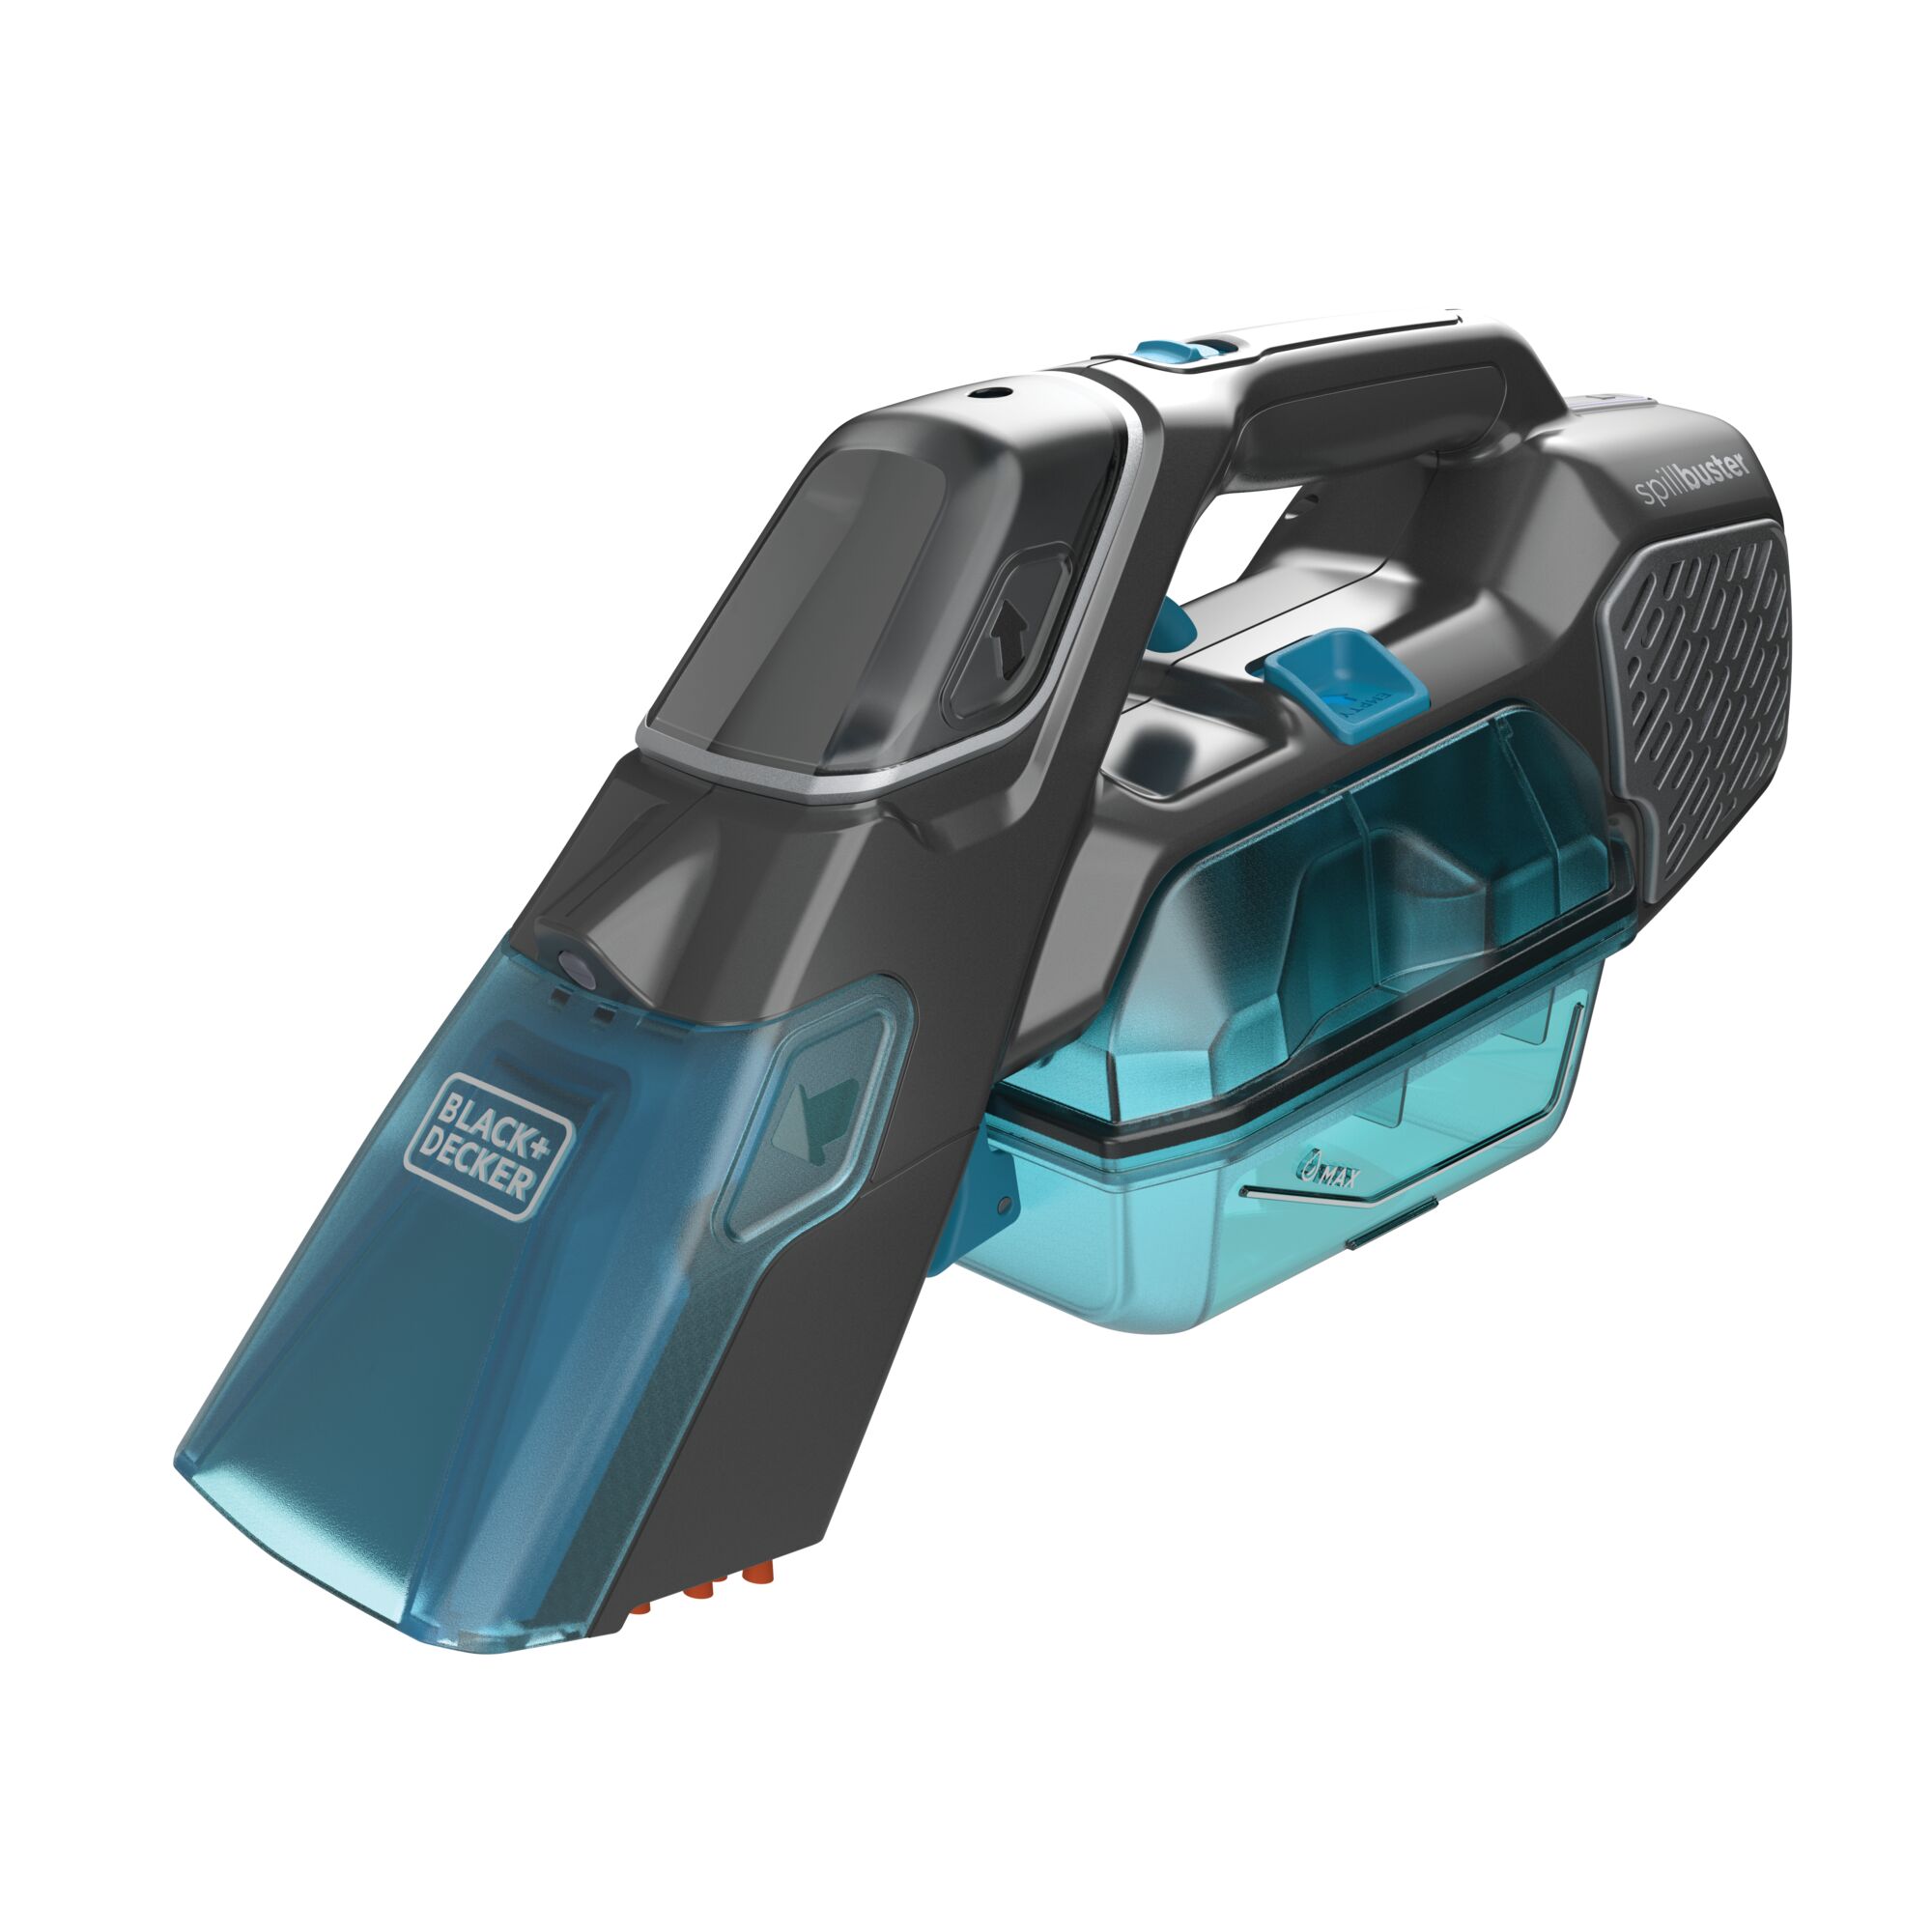 Profile of Black and decker Spillbuster Cordless Spill and Spot Cleaner With Extra Filter